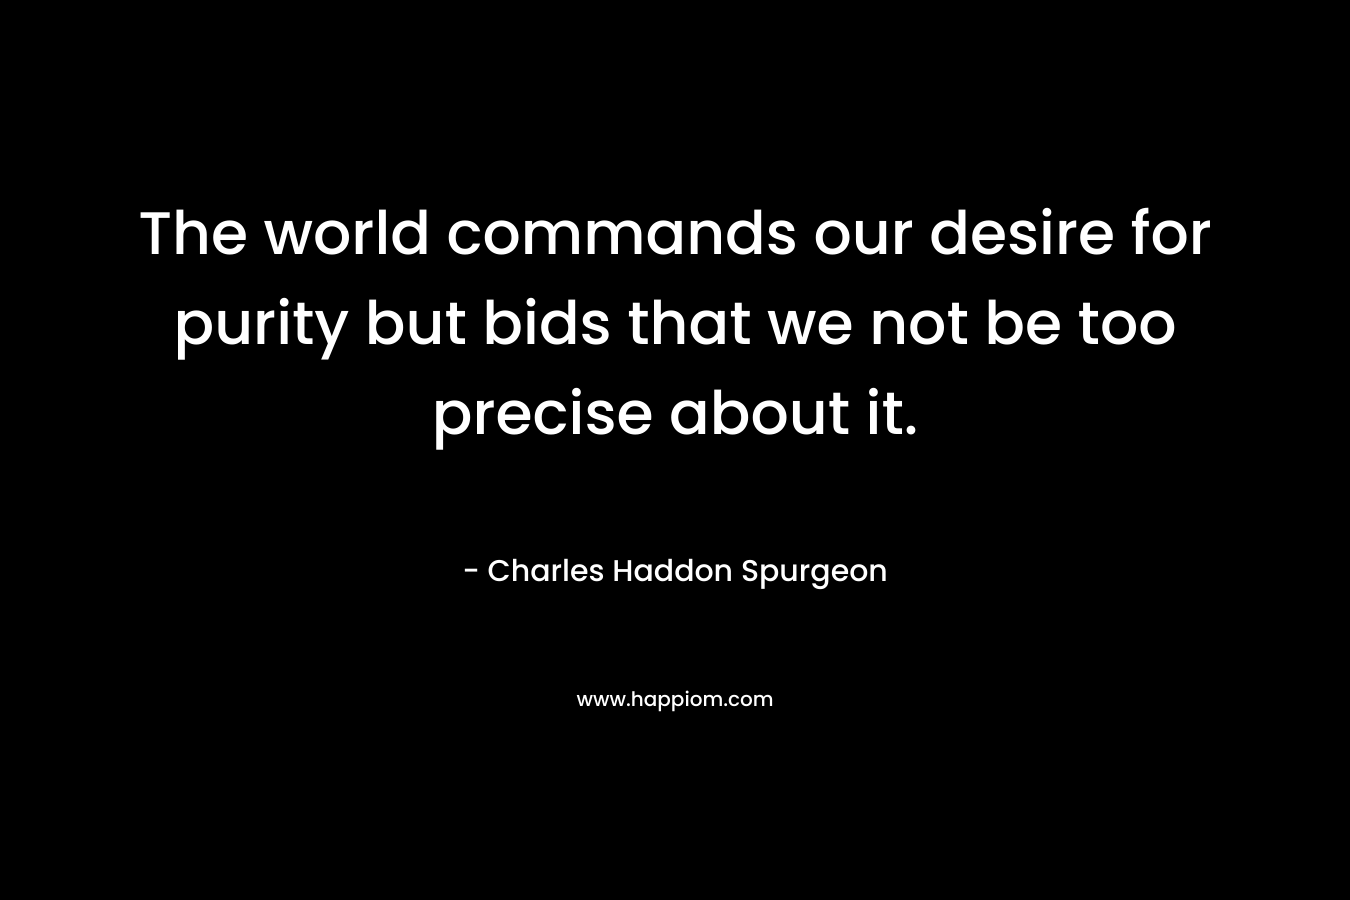 The world commands our desire for purity but bids that we not be too precise about it. – Charles Haddon Spurgeon